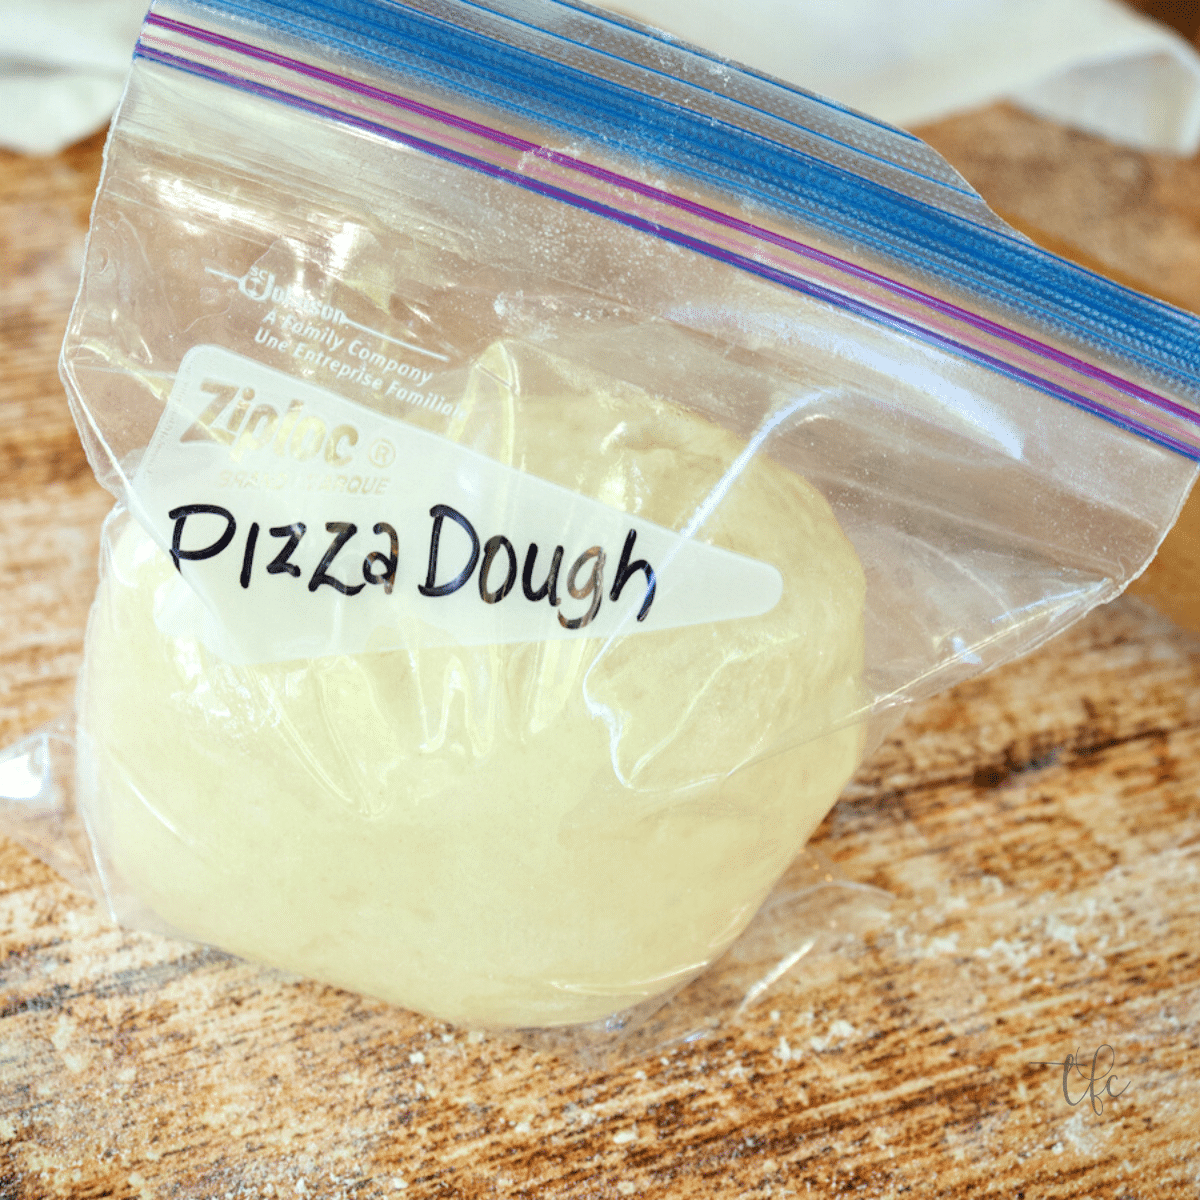 Pizza dough in a freezer baggie ready to be frozen.